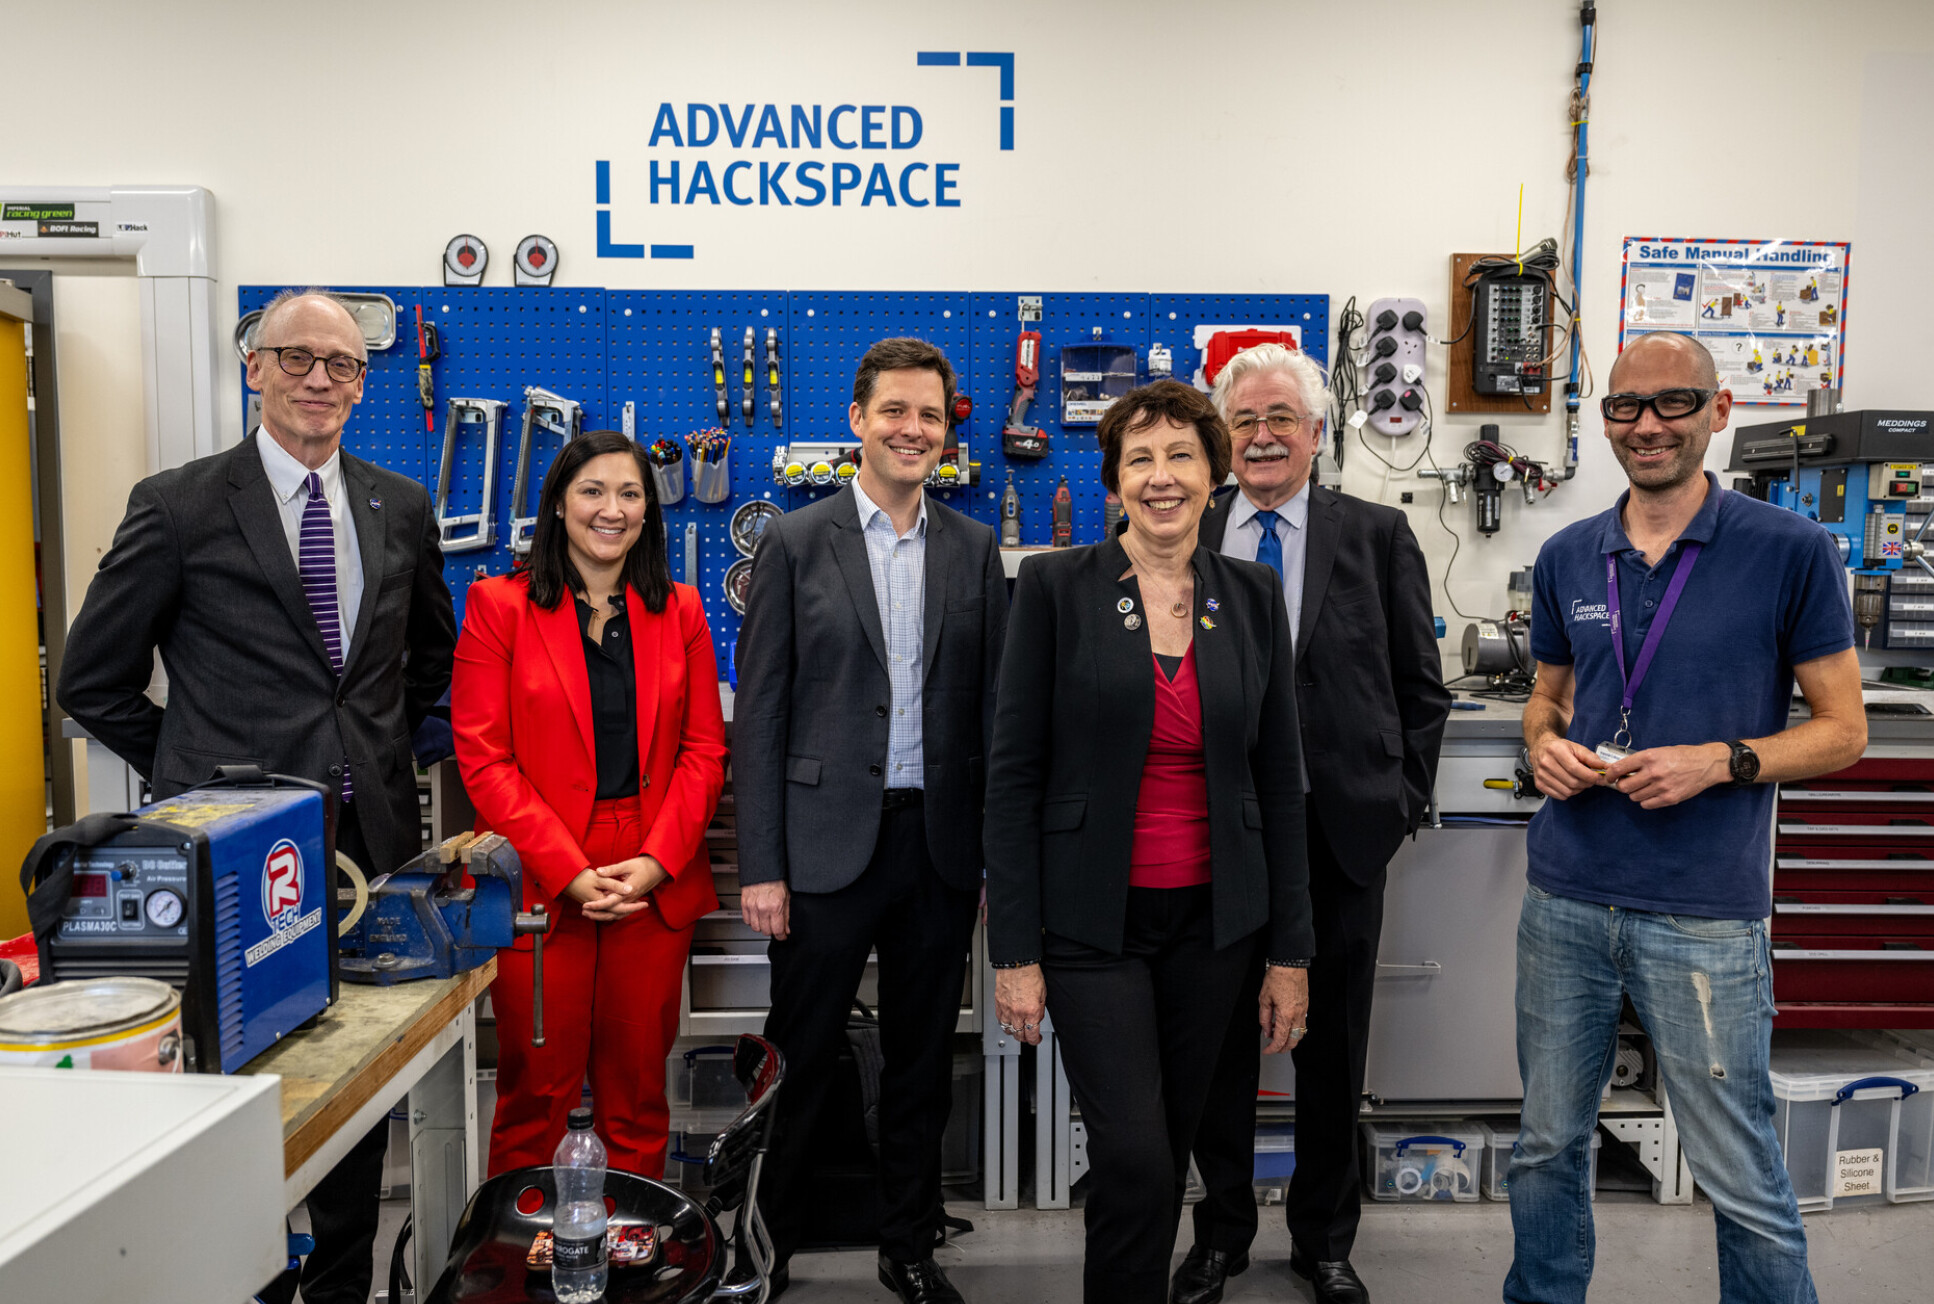 Group of people in a tool room with 'Advanced Hackspace' on the wall